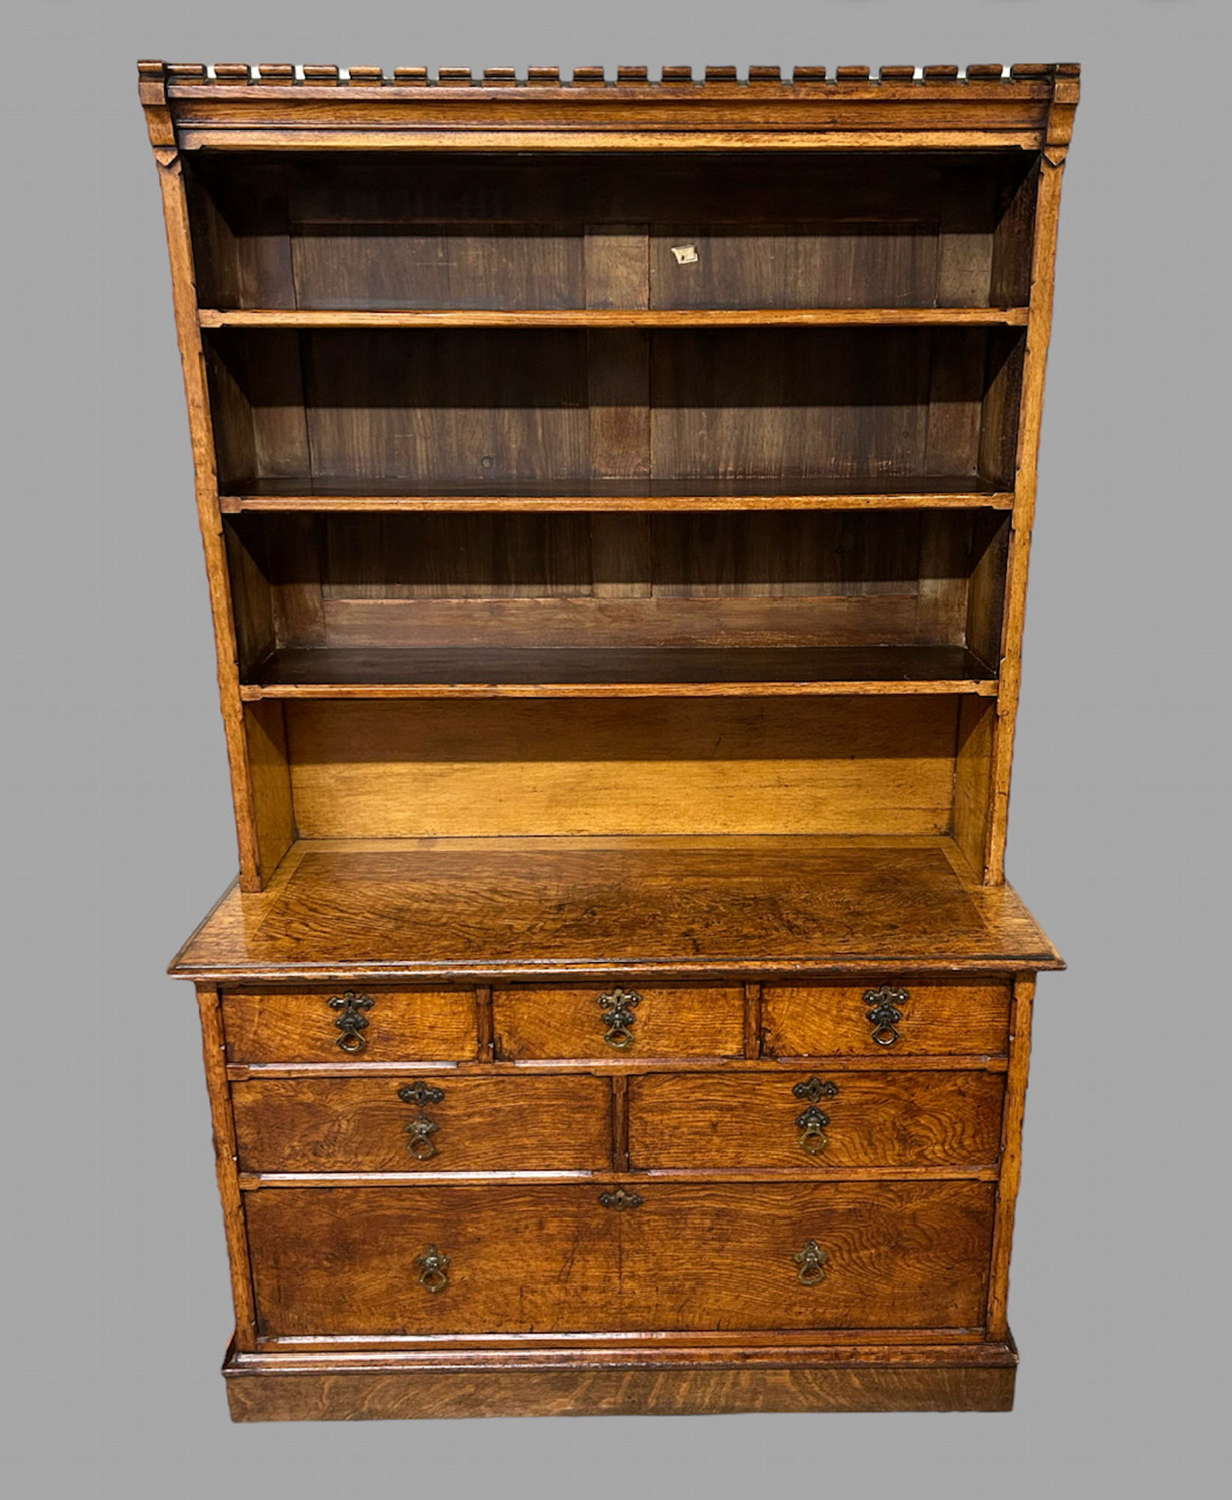 A 19thc Multi Wood Gothic Style Dresser/Bookcase